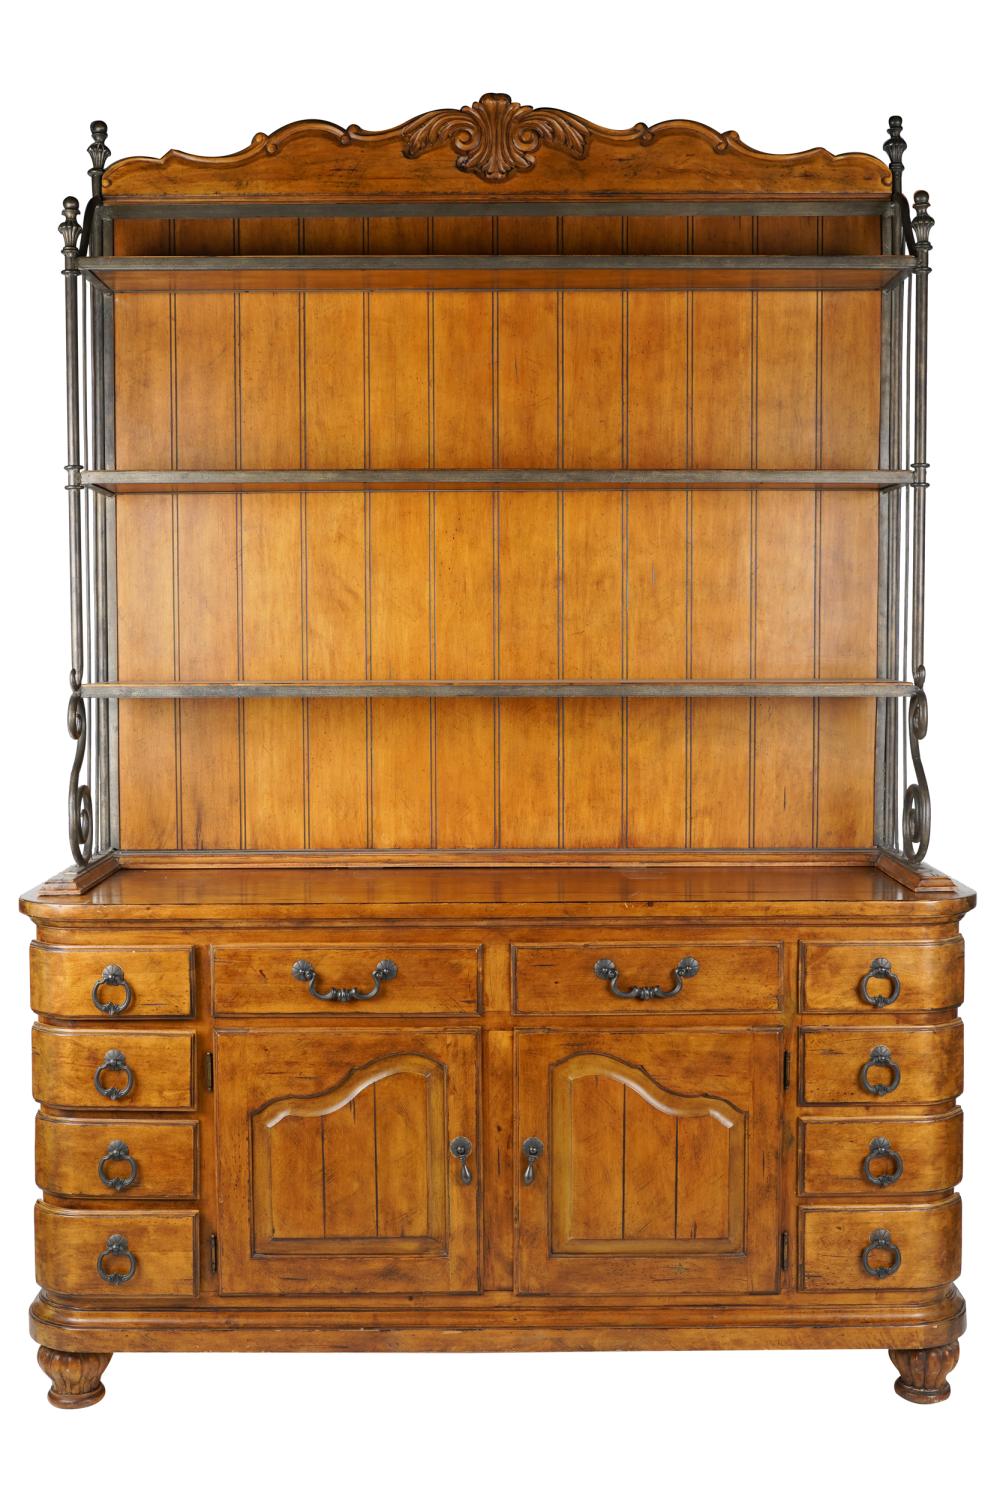 FRENCH PROVINCIAL STYLE BUFFET20th century;